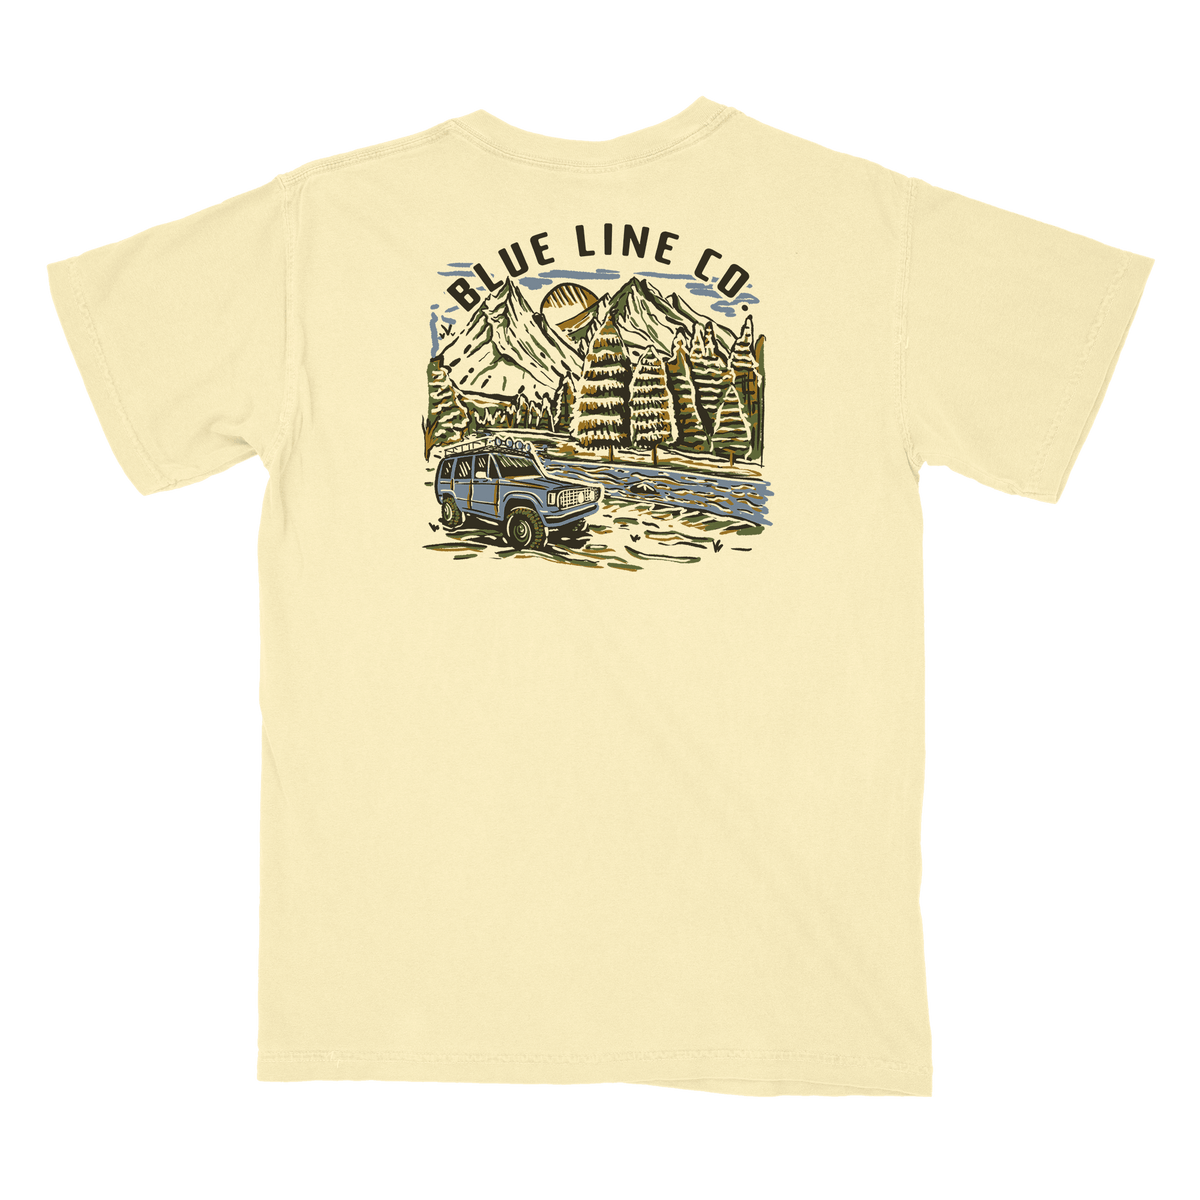 Overland Shirt by BlueLineCo.